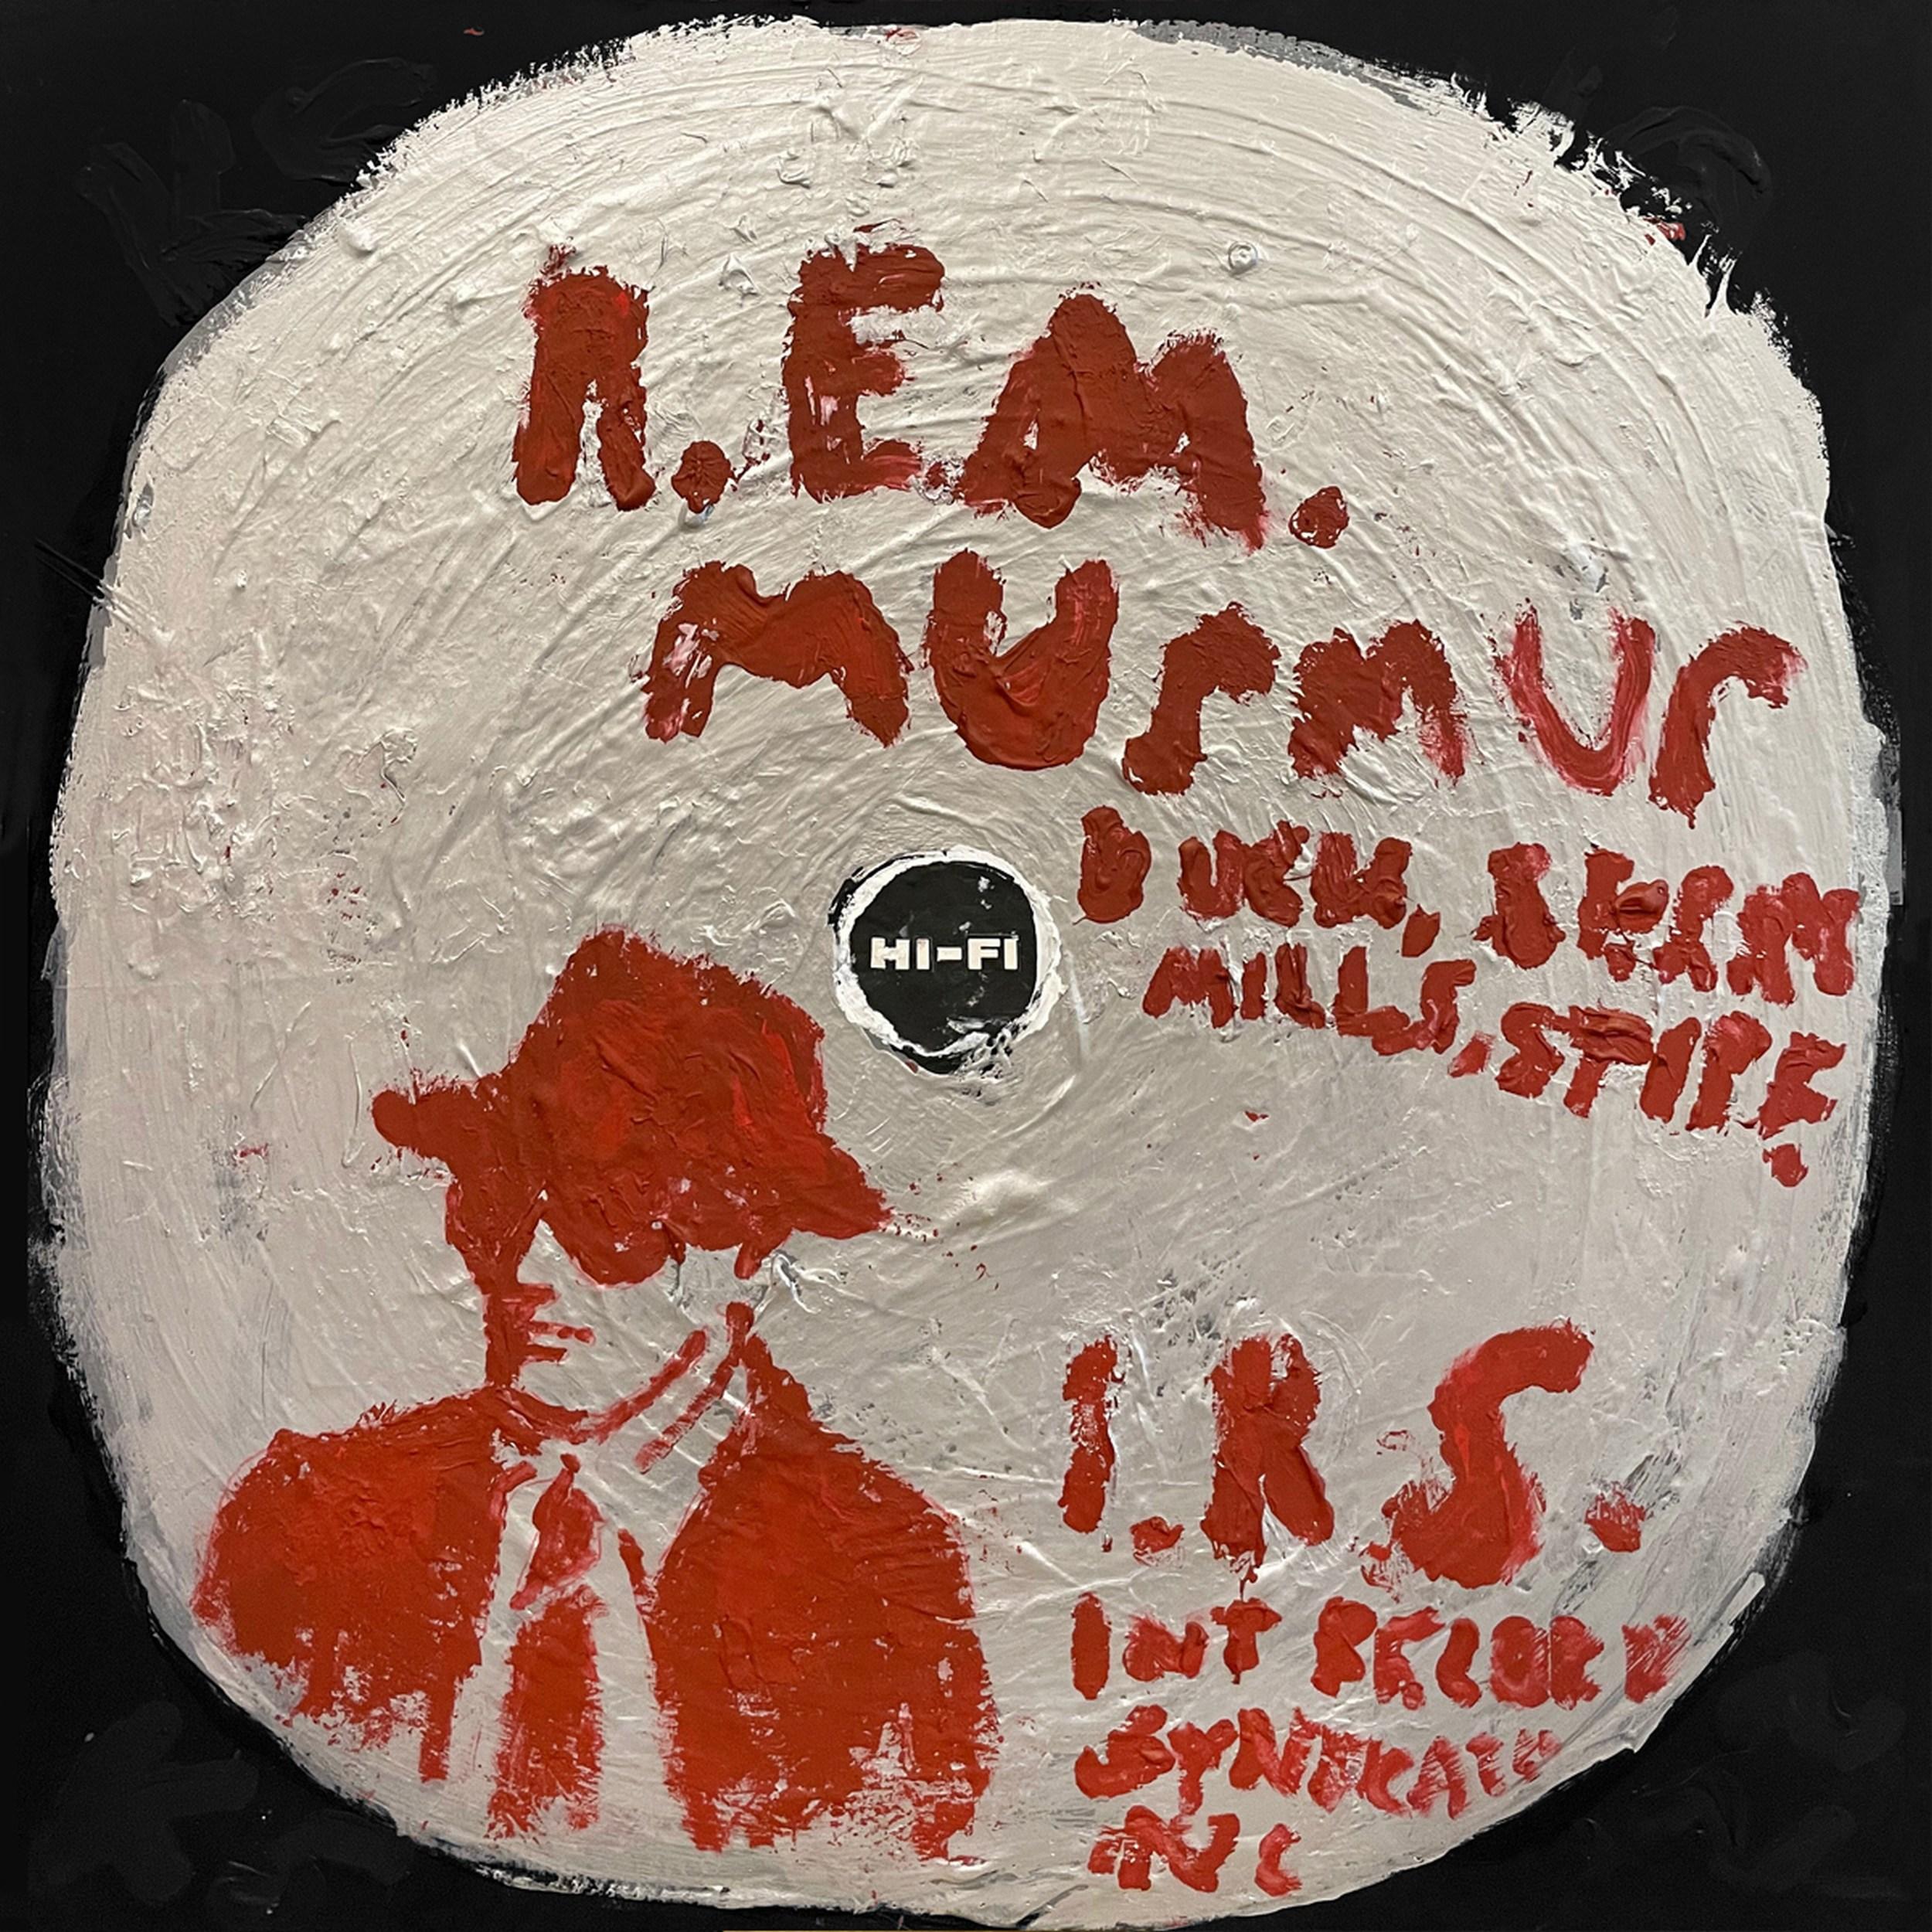 Kerry Smith Figurative Painting – R.E.M. - Murmur (Grammy, Albumkunst, Iconic, Rock and Roll, Pop, Legendary)